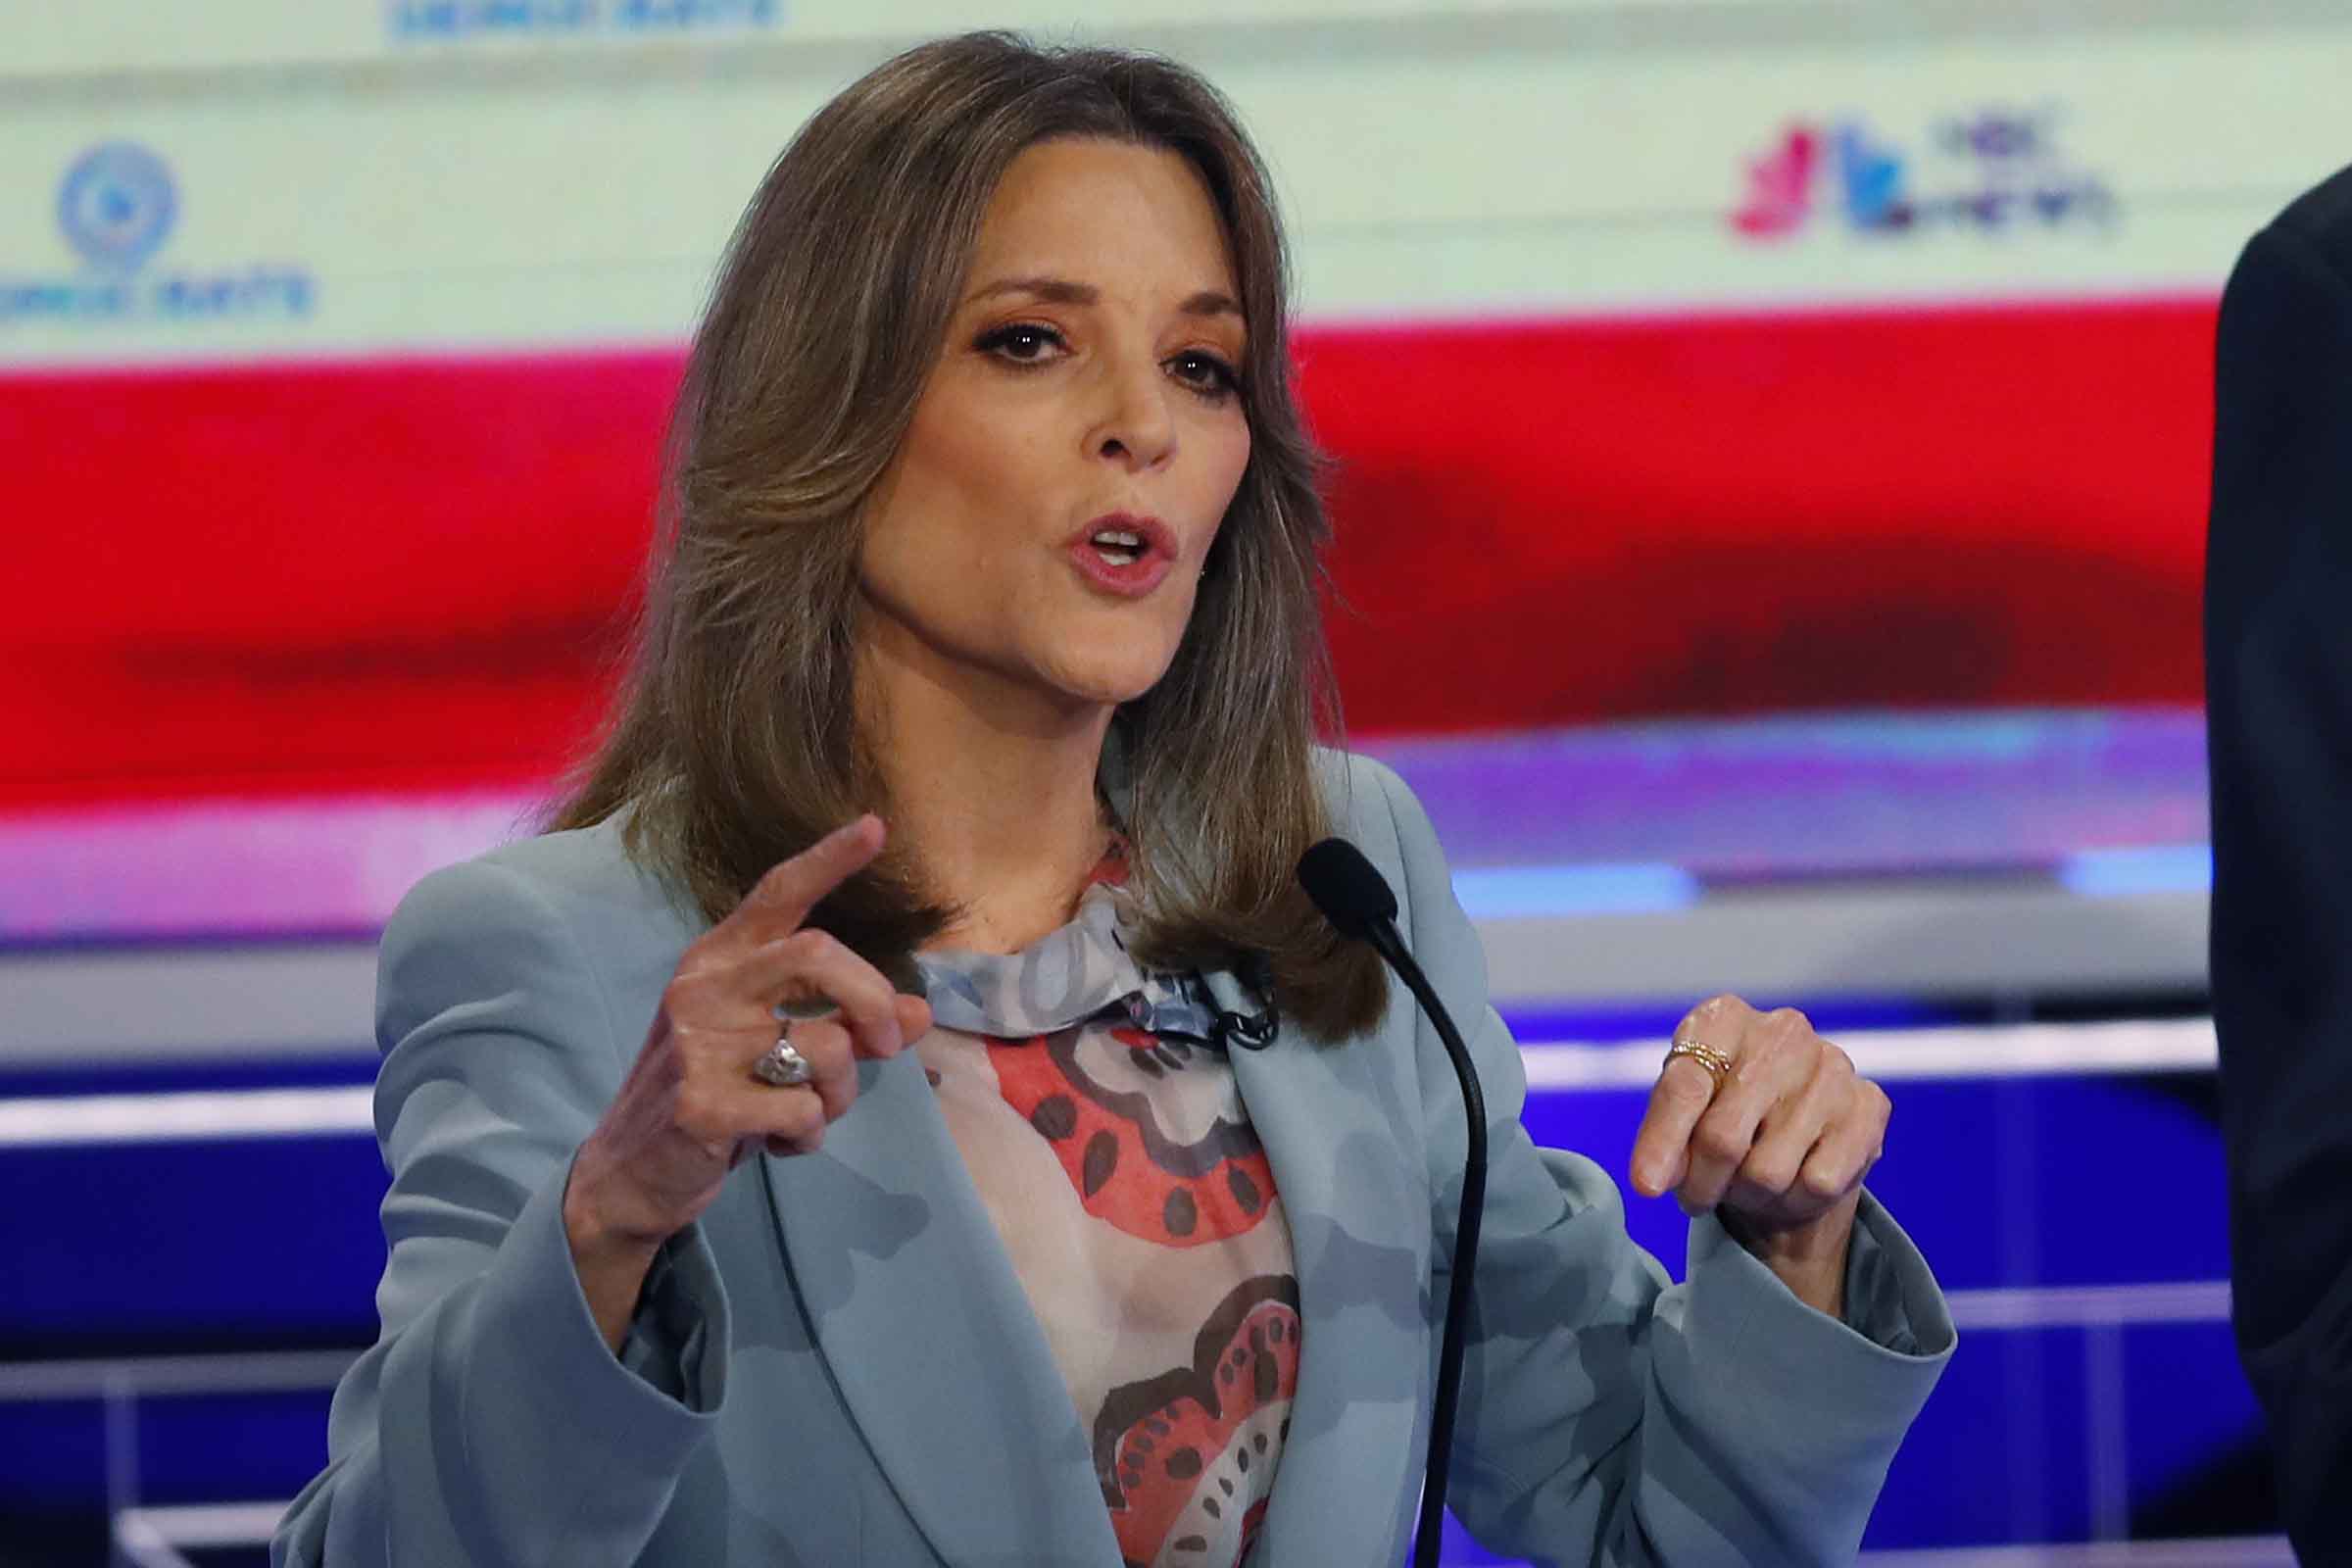 Democratic presidential candidate author Marianne Williamson speaks during the Democratic primary debate hosted by NBC News at the Adrienne Arsht Center for the Performing Arts, Thursday, June 27, 2019, in Miami. (Wilfredo Lee—AP)